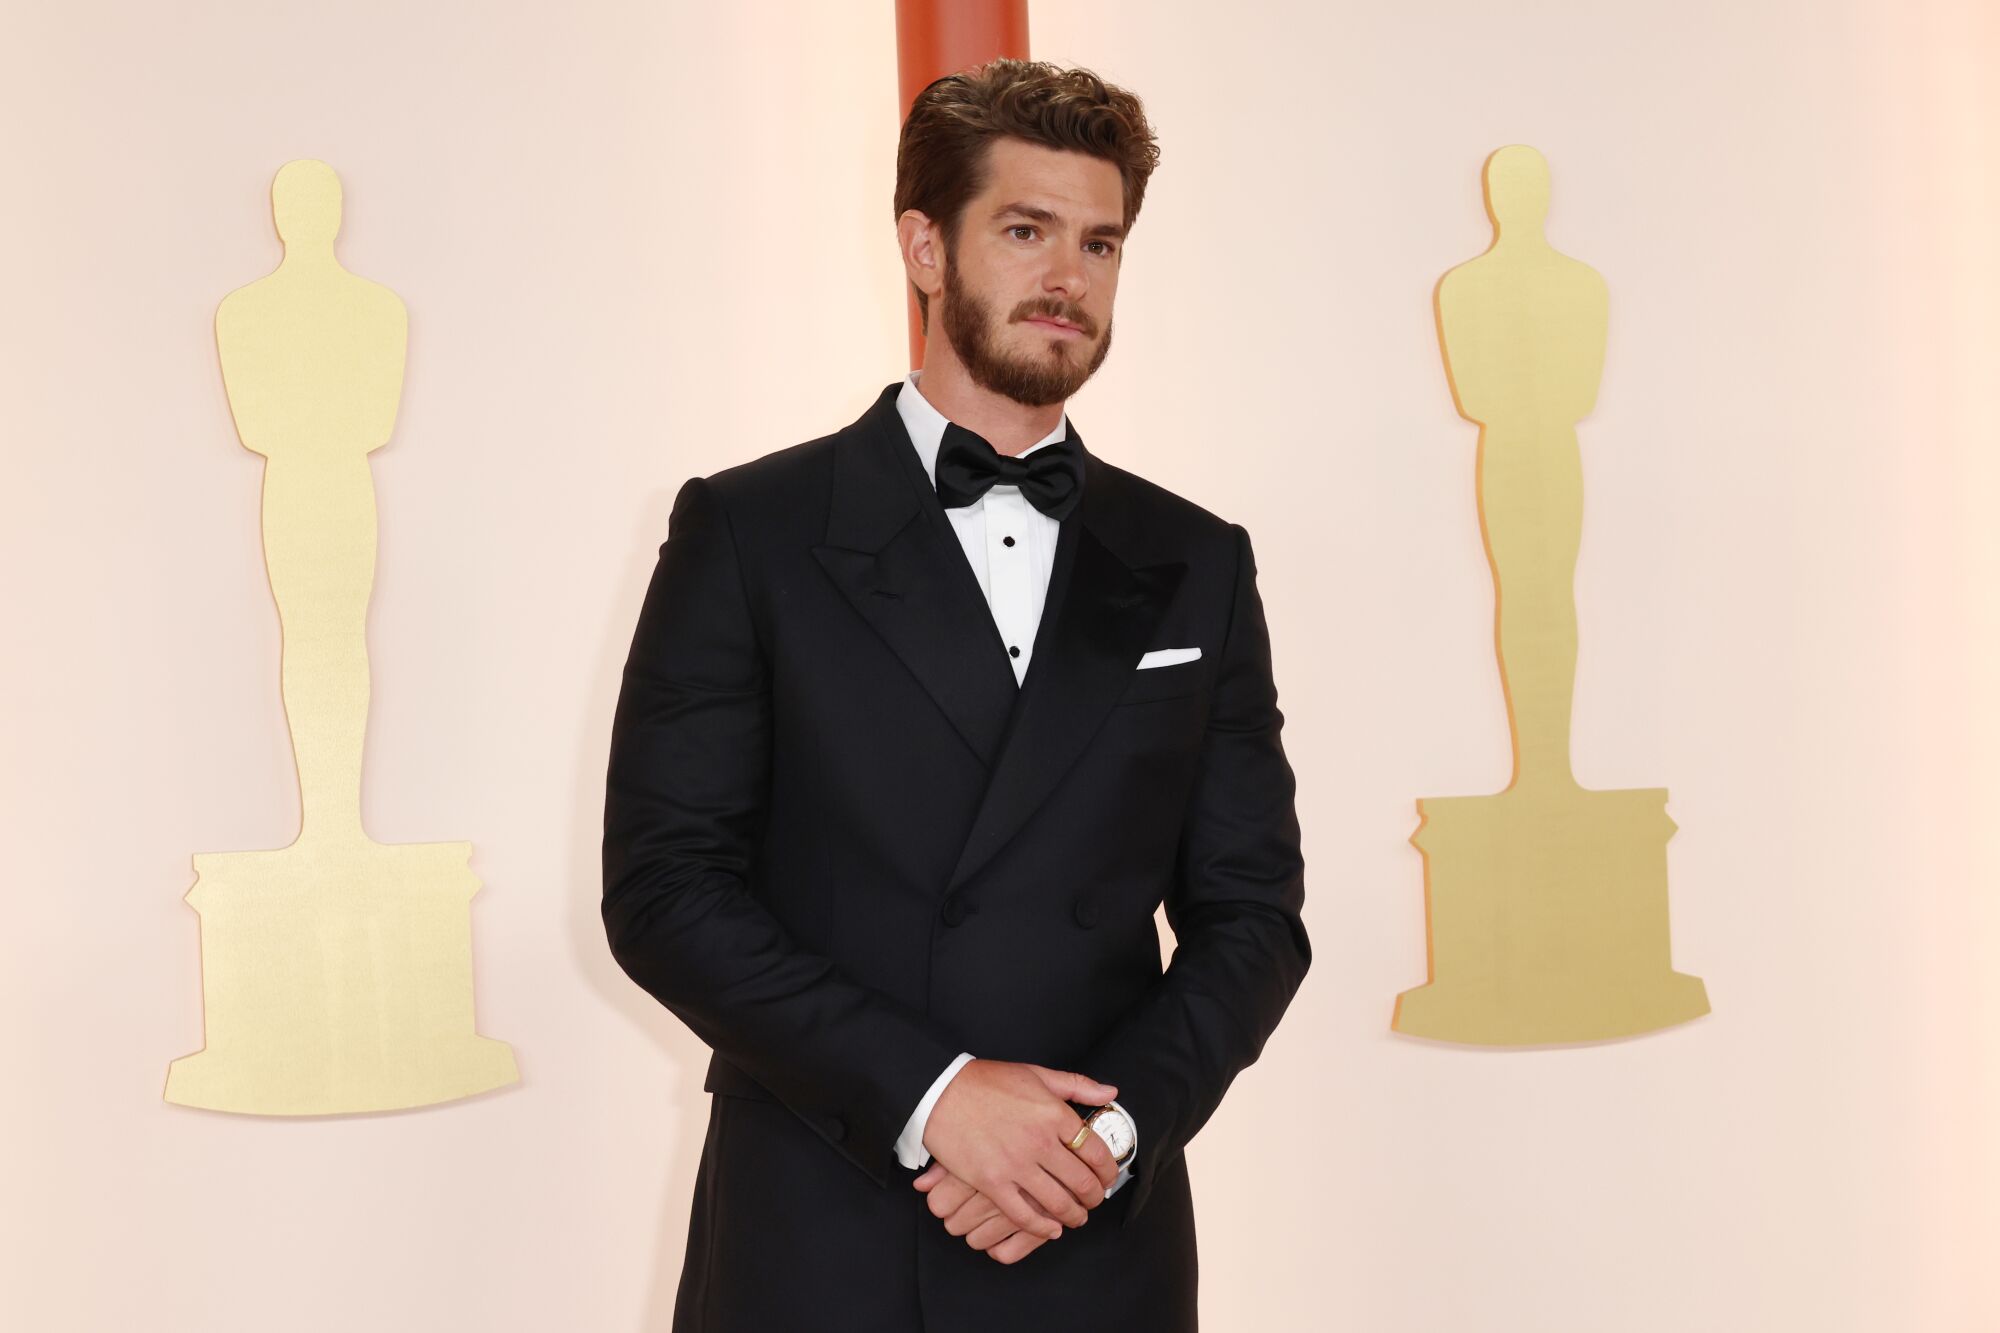 Andrew Garfield in a classic black tuxedo and bow tie, plus a perfectly aligned white pocket square. 